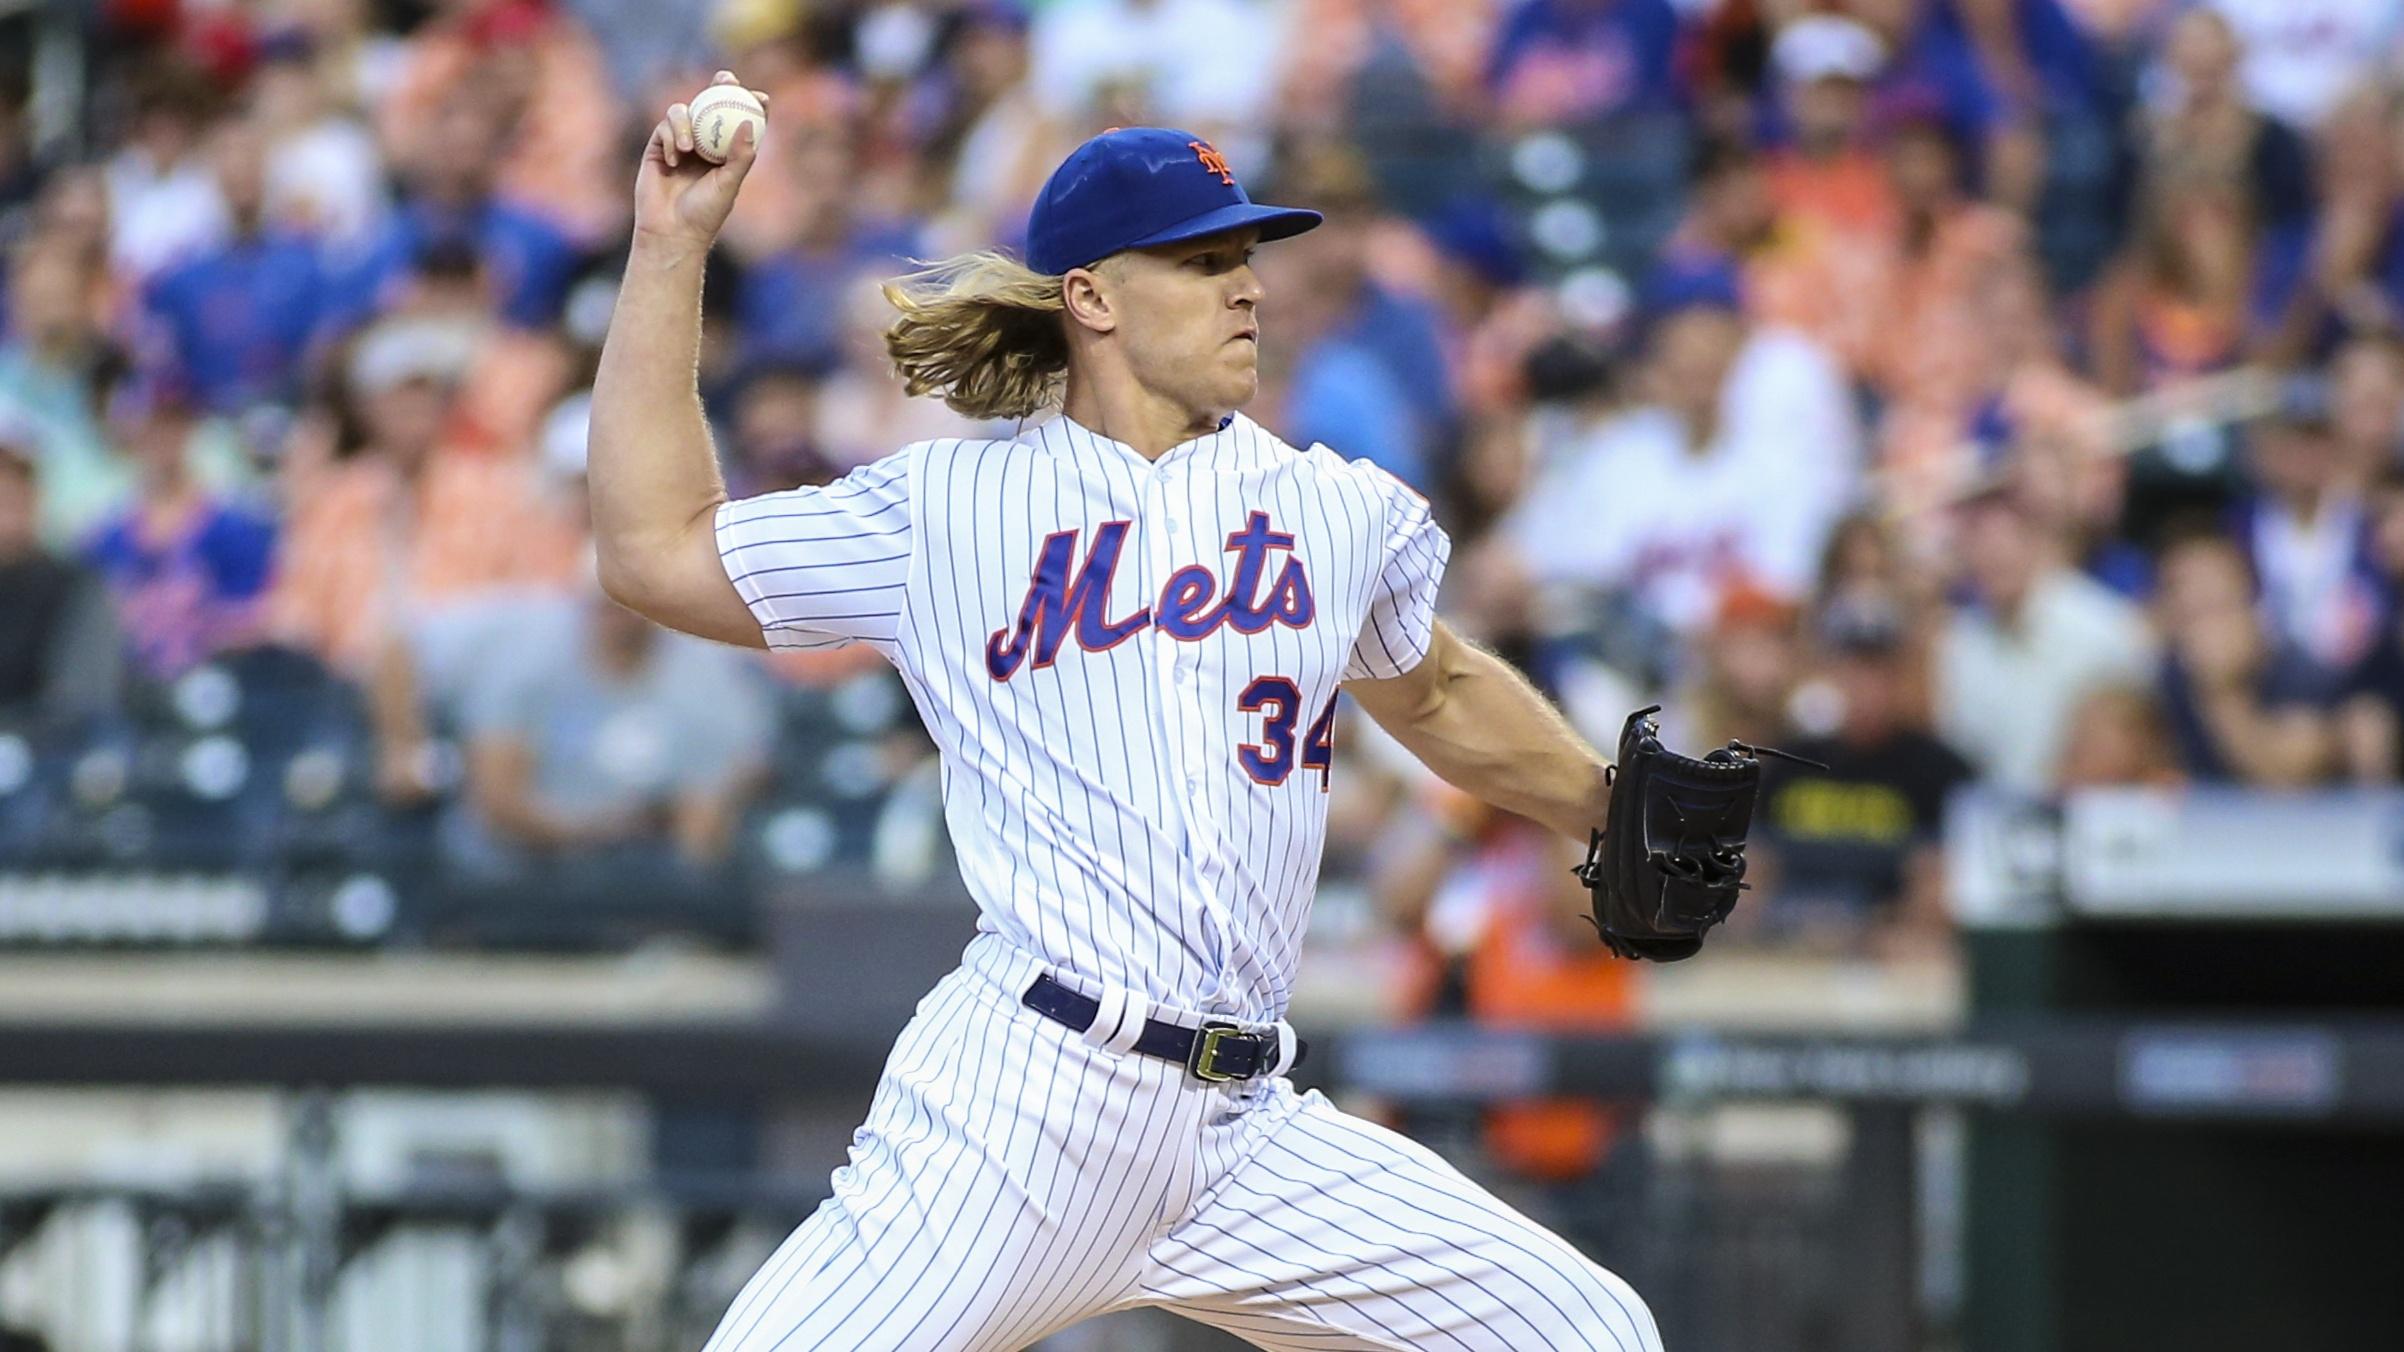 Aug 10, 2019; New York City, NY, USA; New York Mets pitcher Noah Syndergaard (34) pitches in the first inning against the Washington Nationals at Citi Field. Mandatory Credit: Wendell Cruz-USA TODAY Sports / © Wendell Cruz-USA TODAY Sports